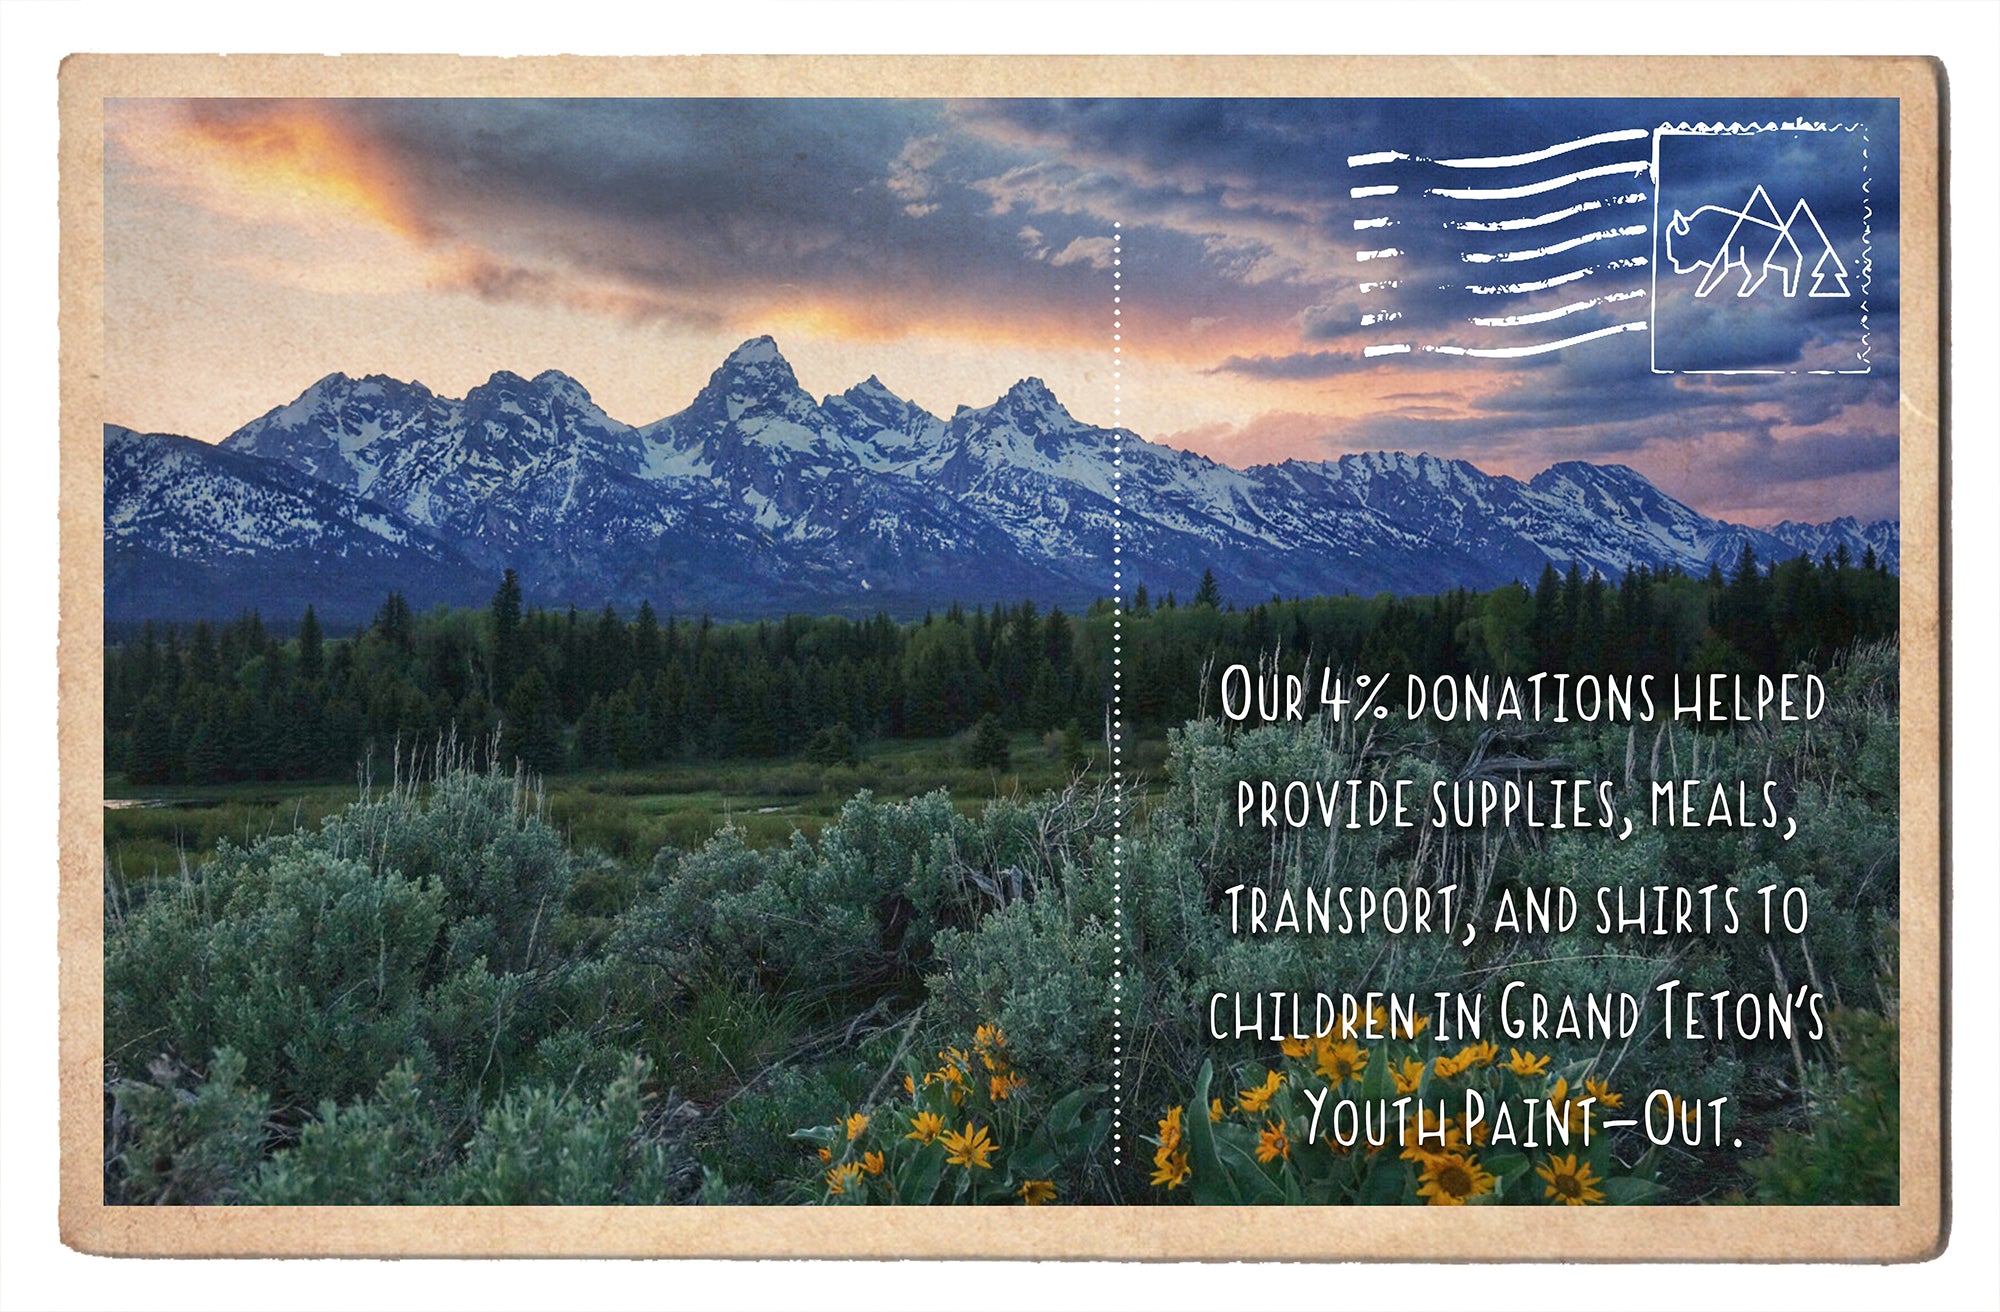 Grand Teton's Youth Paint-Out